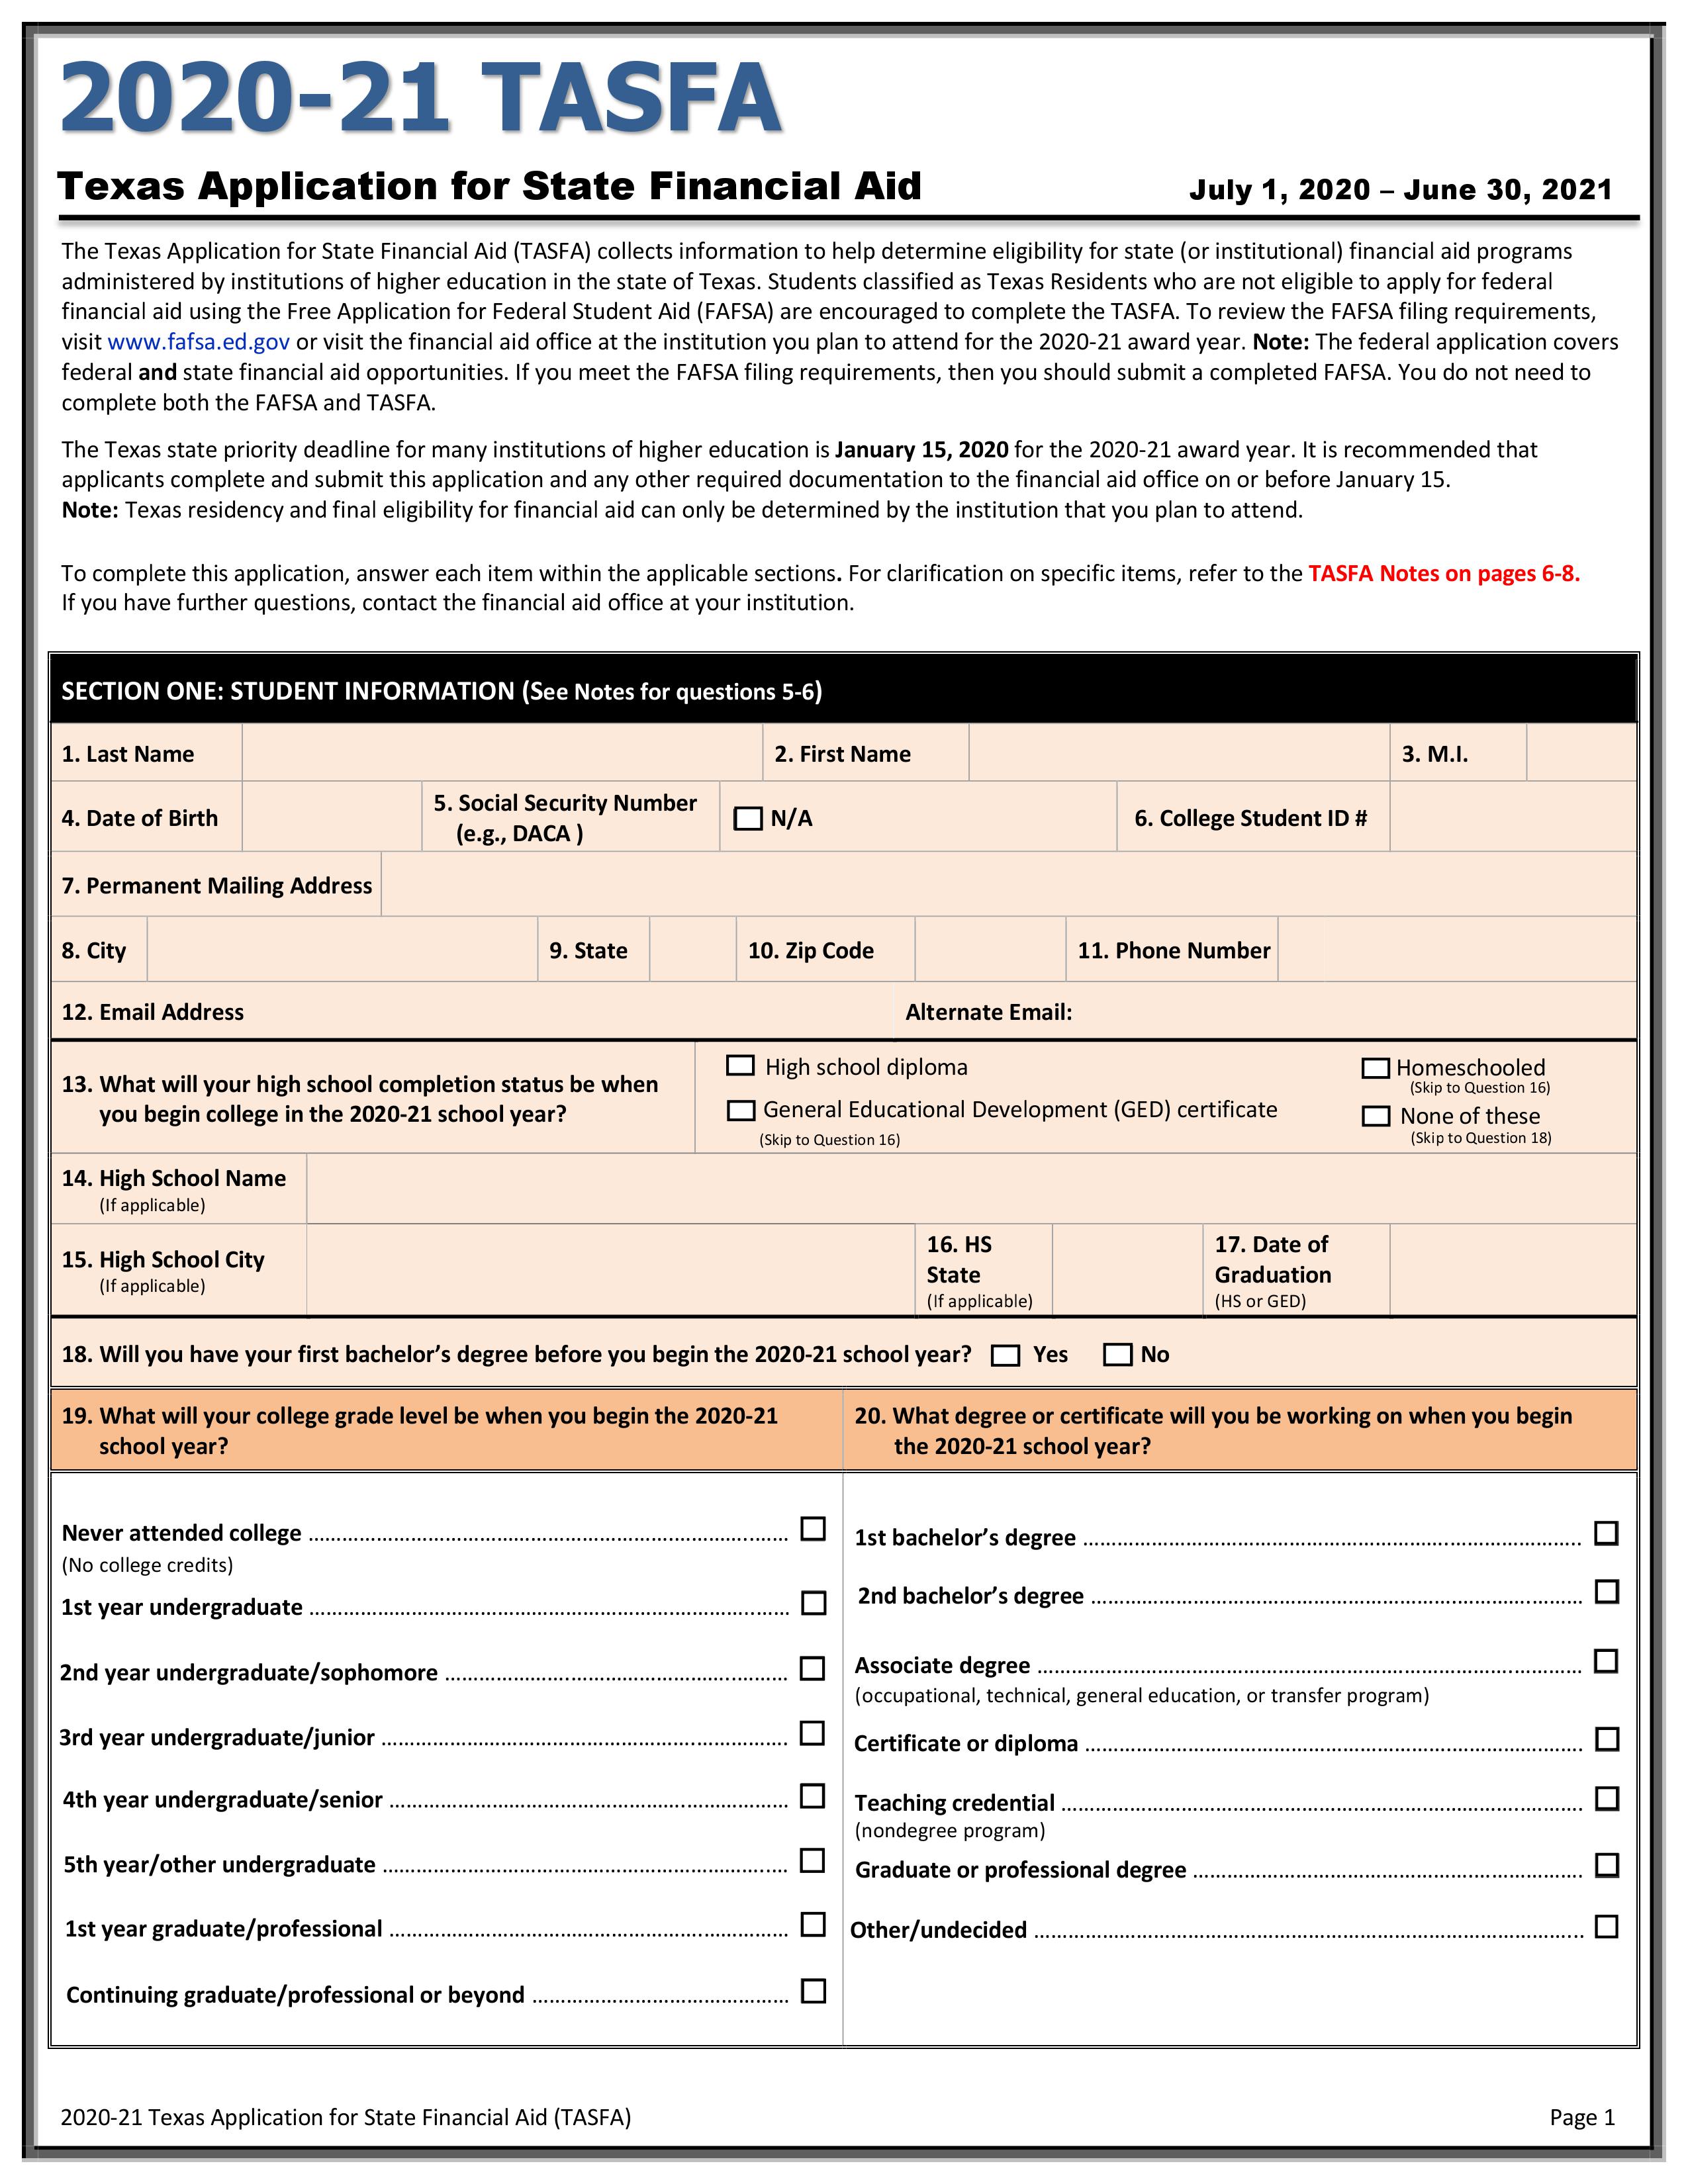 Texas Application for State Financial Aid